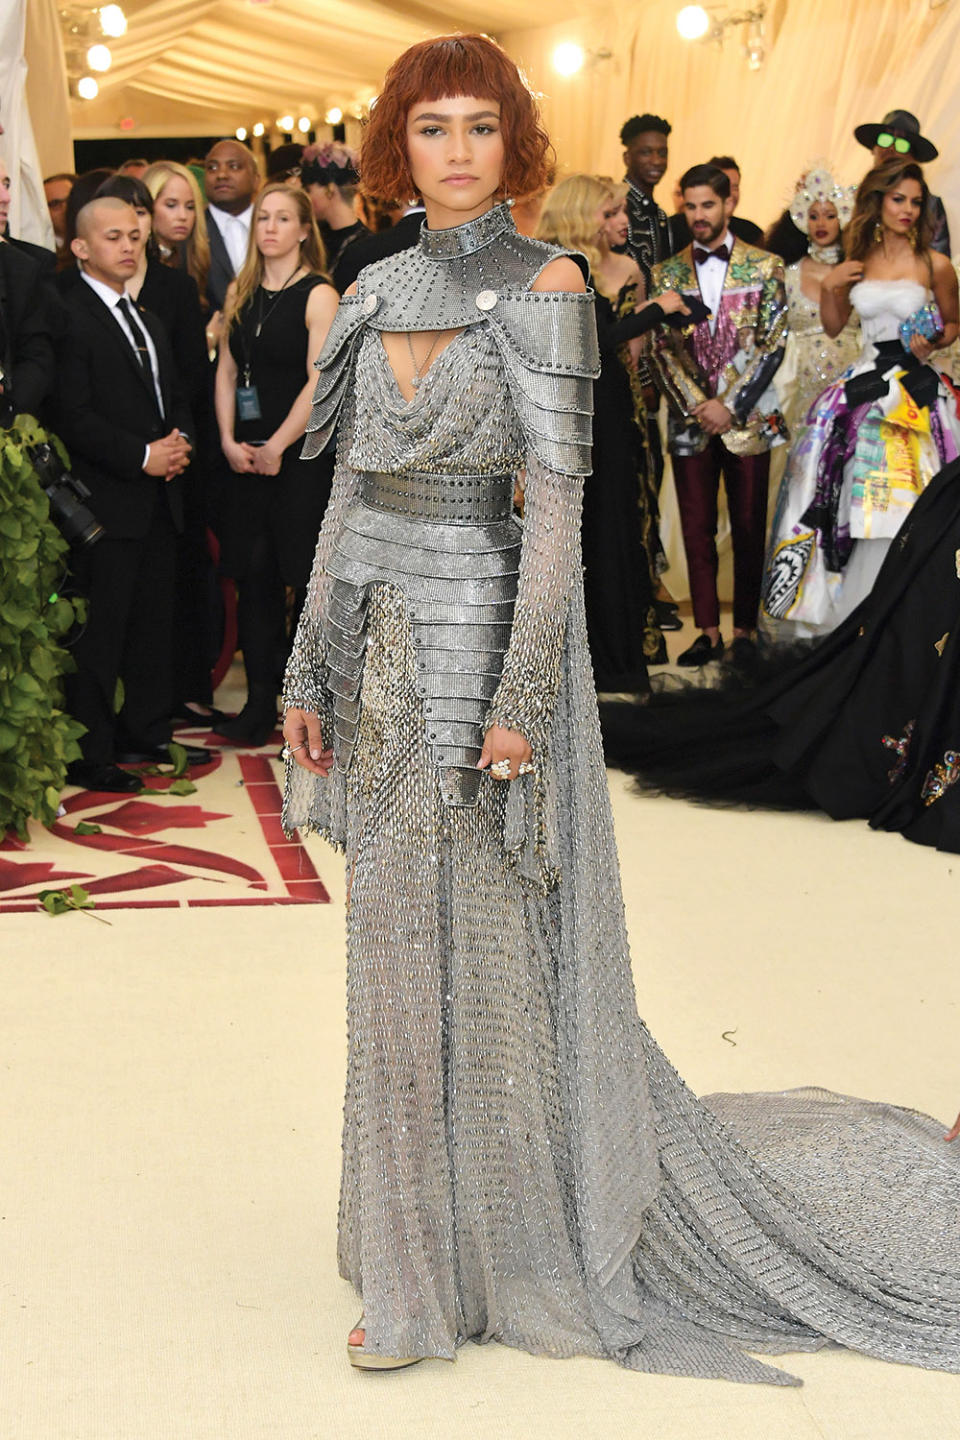 For the Heavenly Bodies-themed evening in 2018, the influencer says Zendaya — wearing an Atelier Versace chain mail gown — channeled the patron saint of France, Joan of Arc, whose wearing of men’s clothing got her executed in 15th century France.